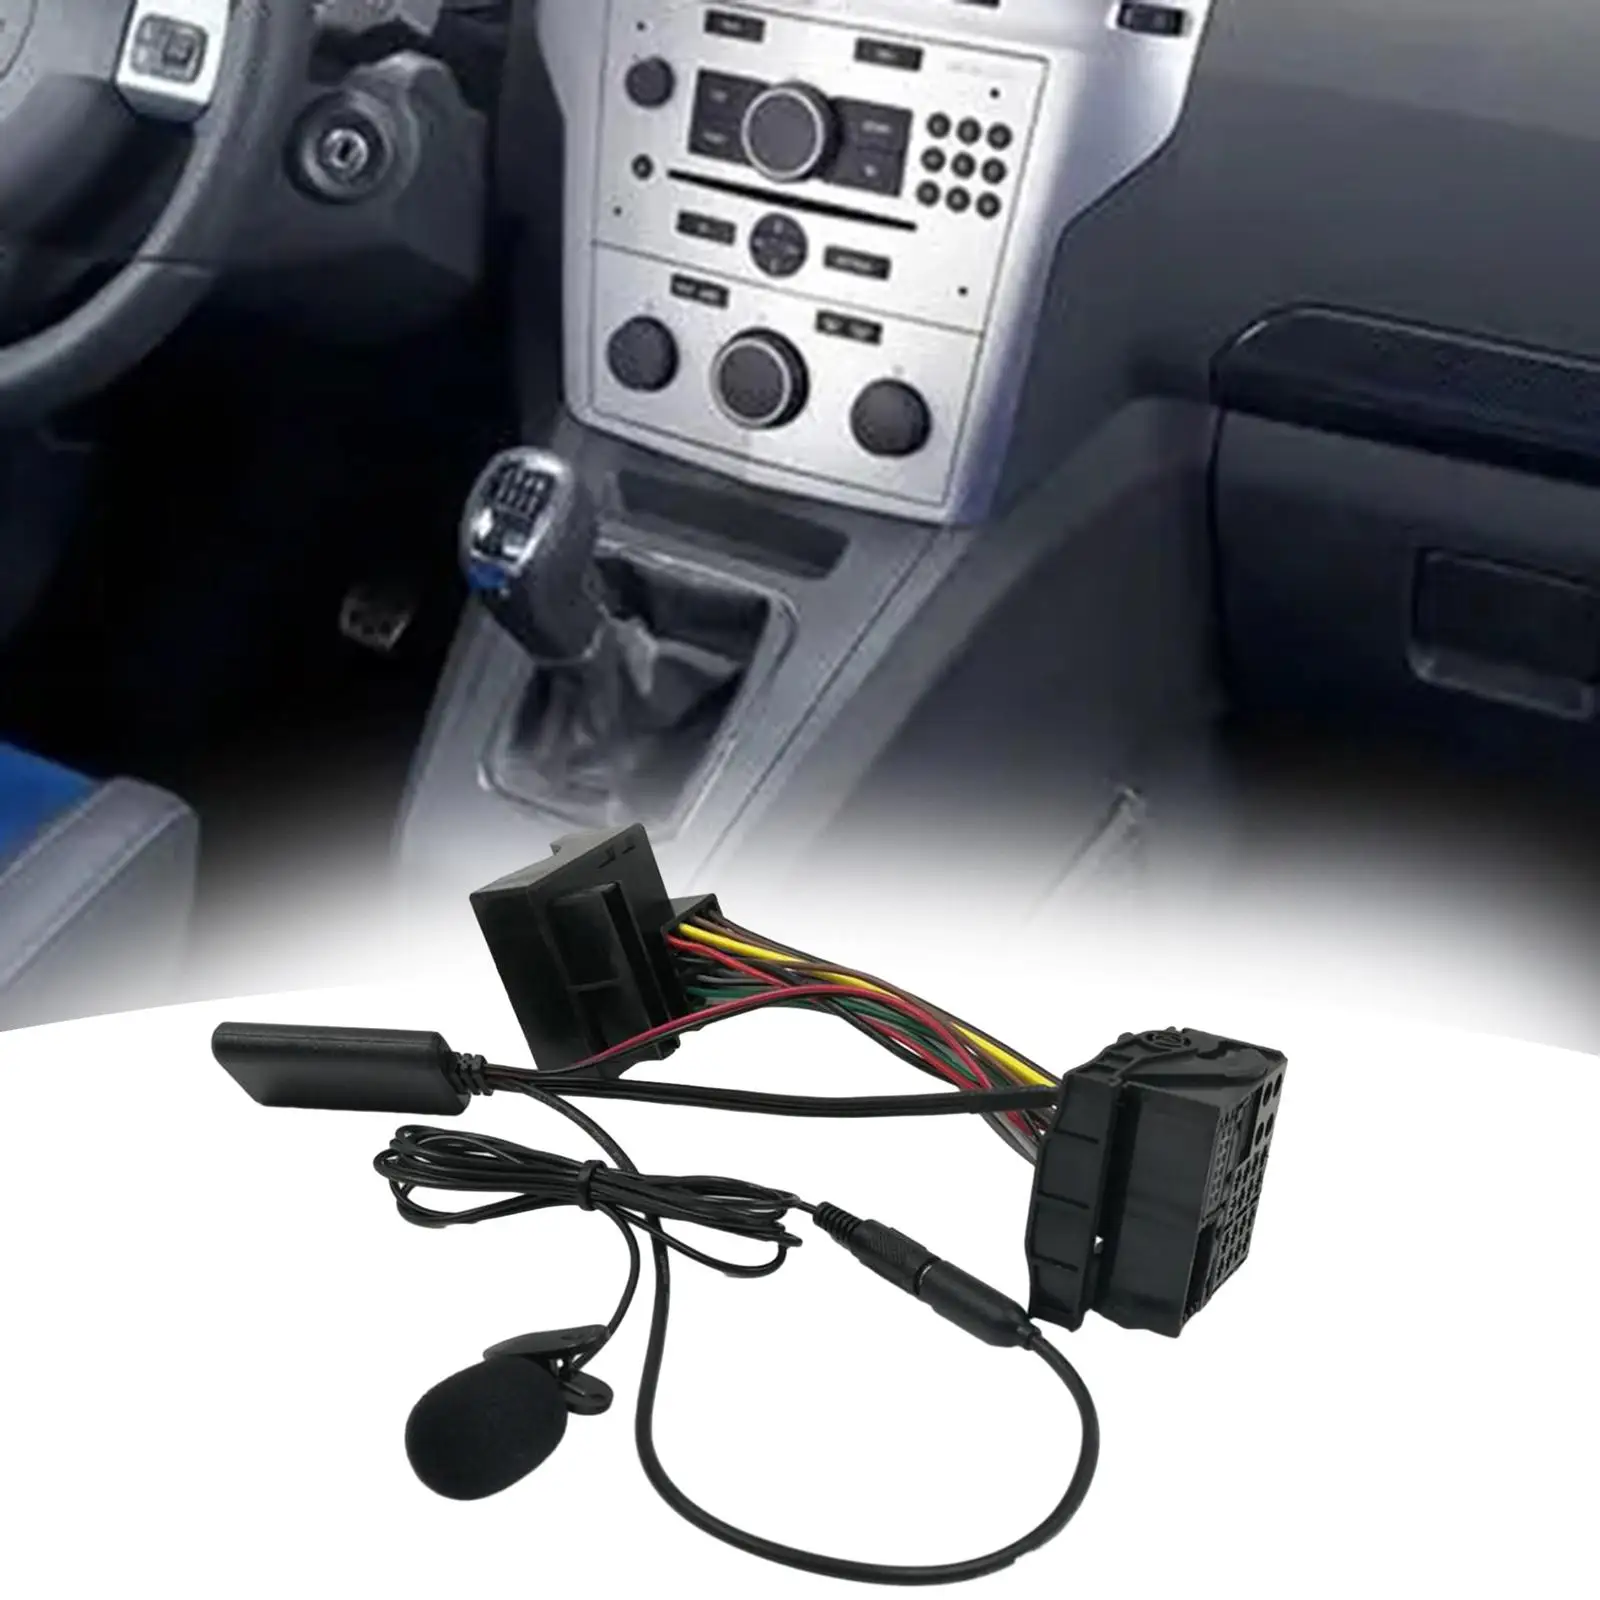 Car Bluetooth AUX Adapter Replacement Parts with Mic Bluetooth 5.0 for Opel CD30 CD40 CD70 DVD90 MP3 Automotive Accessories